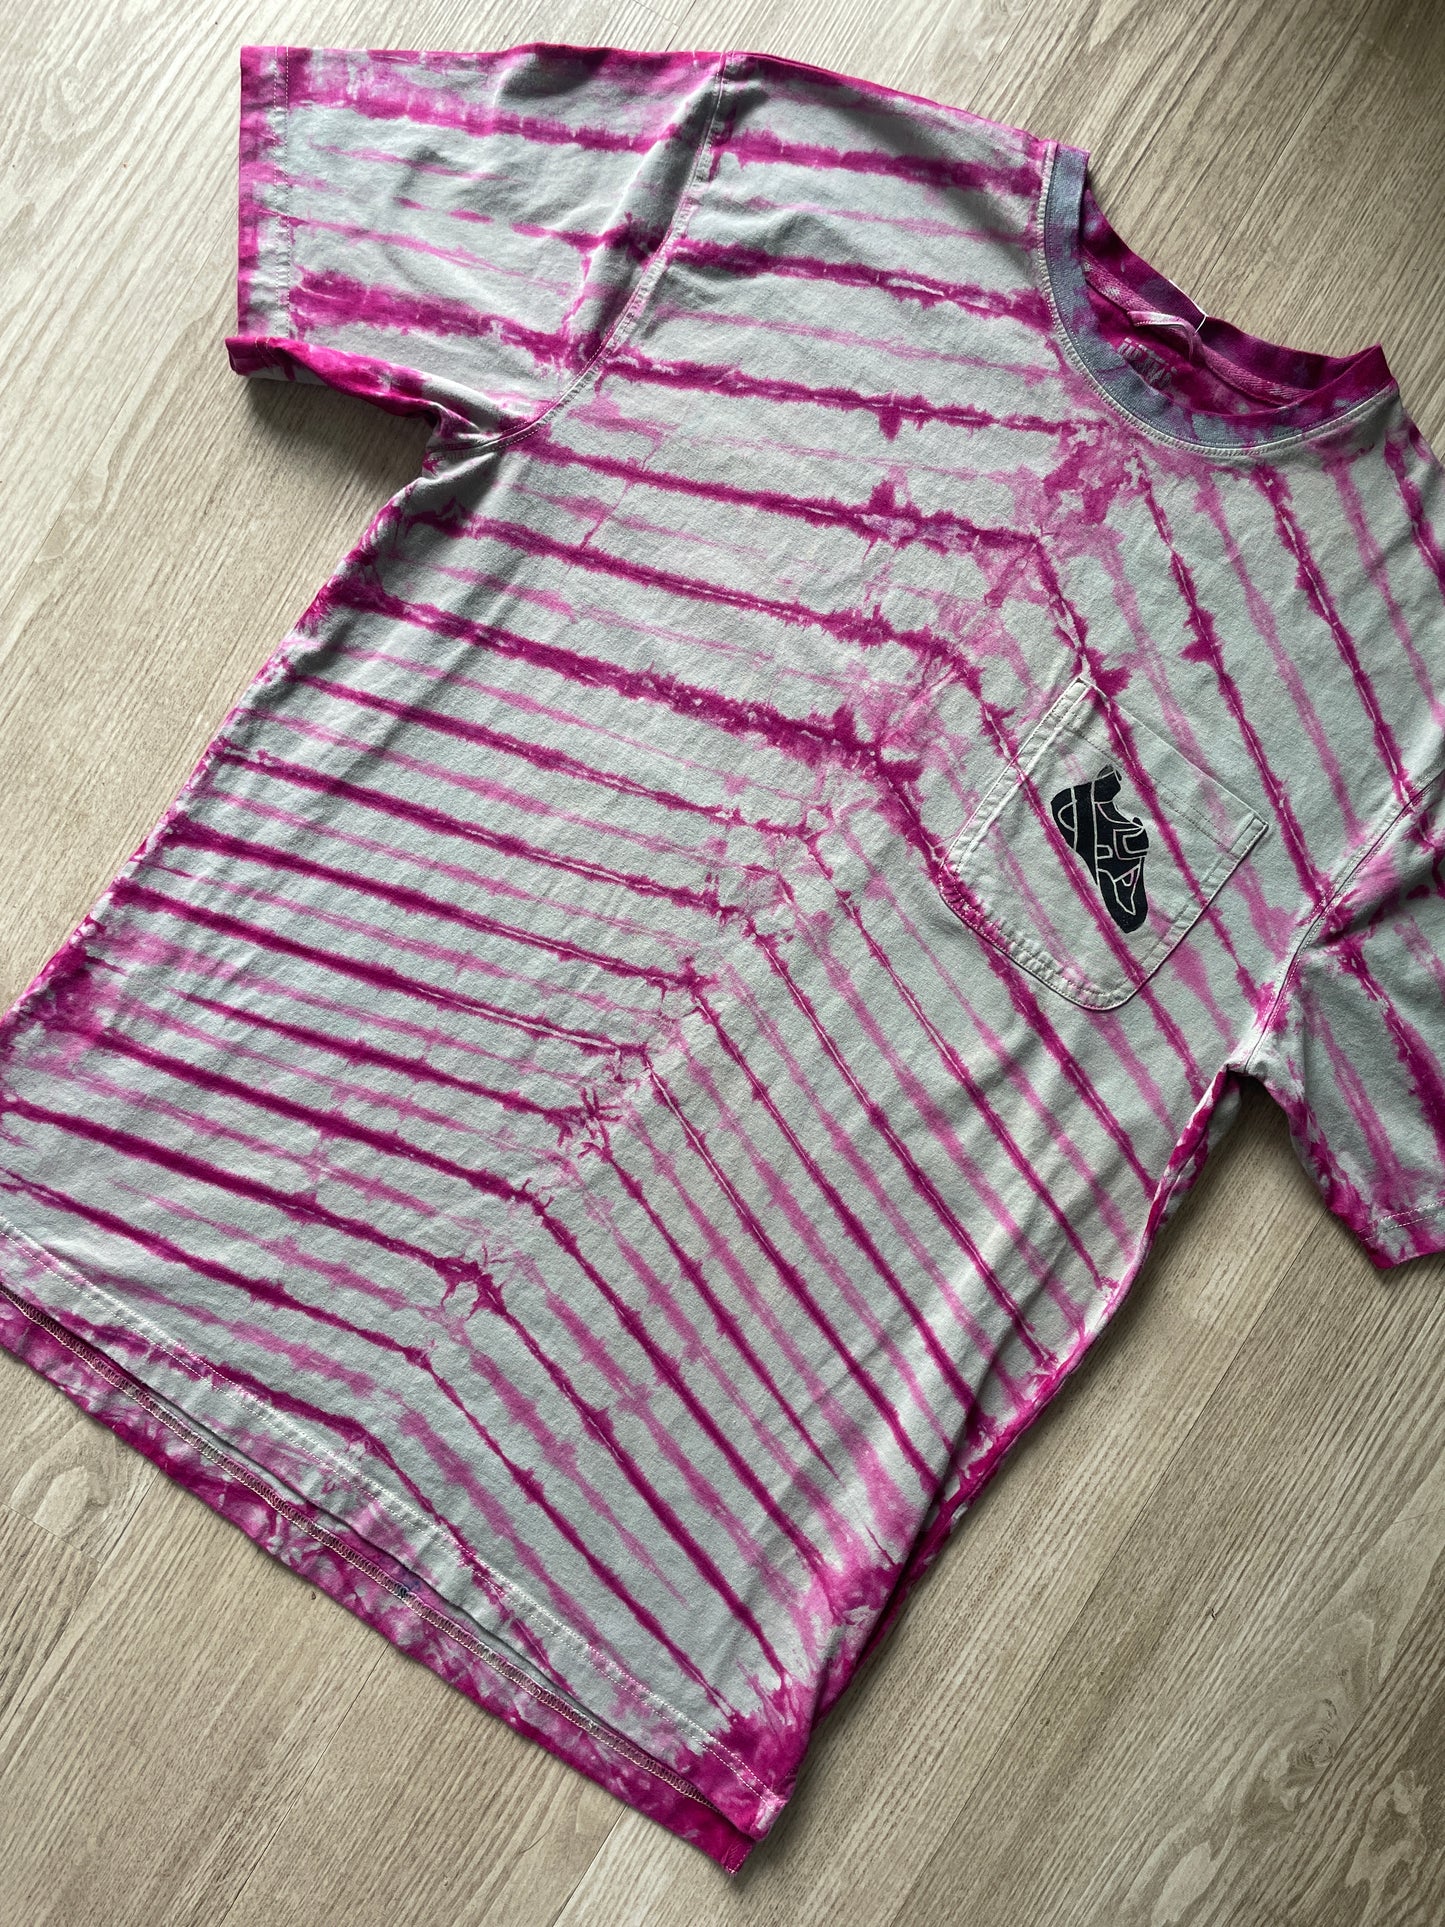 LARGE (Tall) Men’s Climbing Shoe Handmade Tie Dyed T-Shirt | One-Of-a-Kind Gray and Pink Pleated Short Sleeve